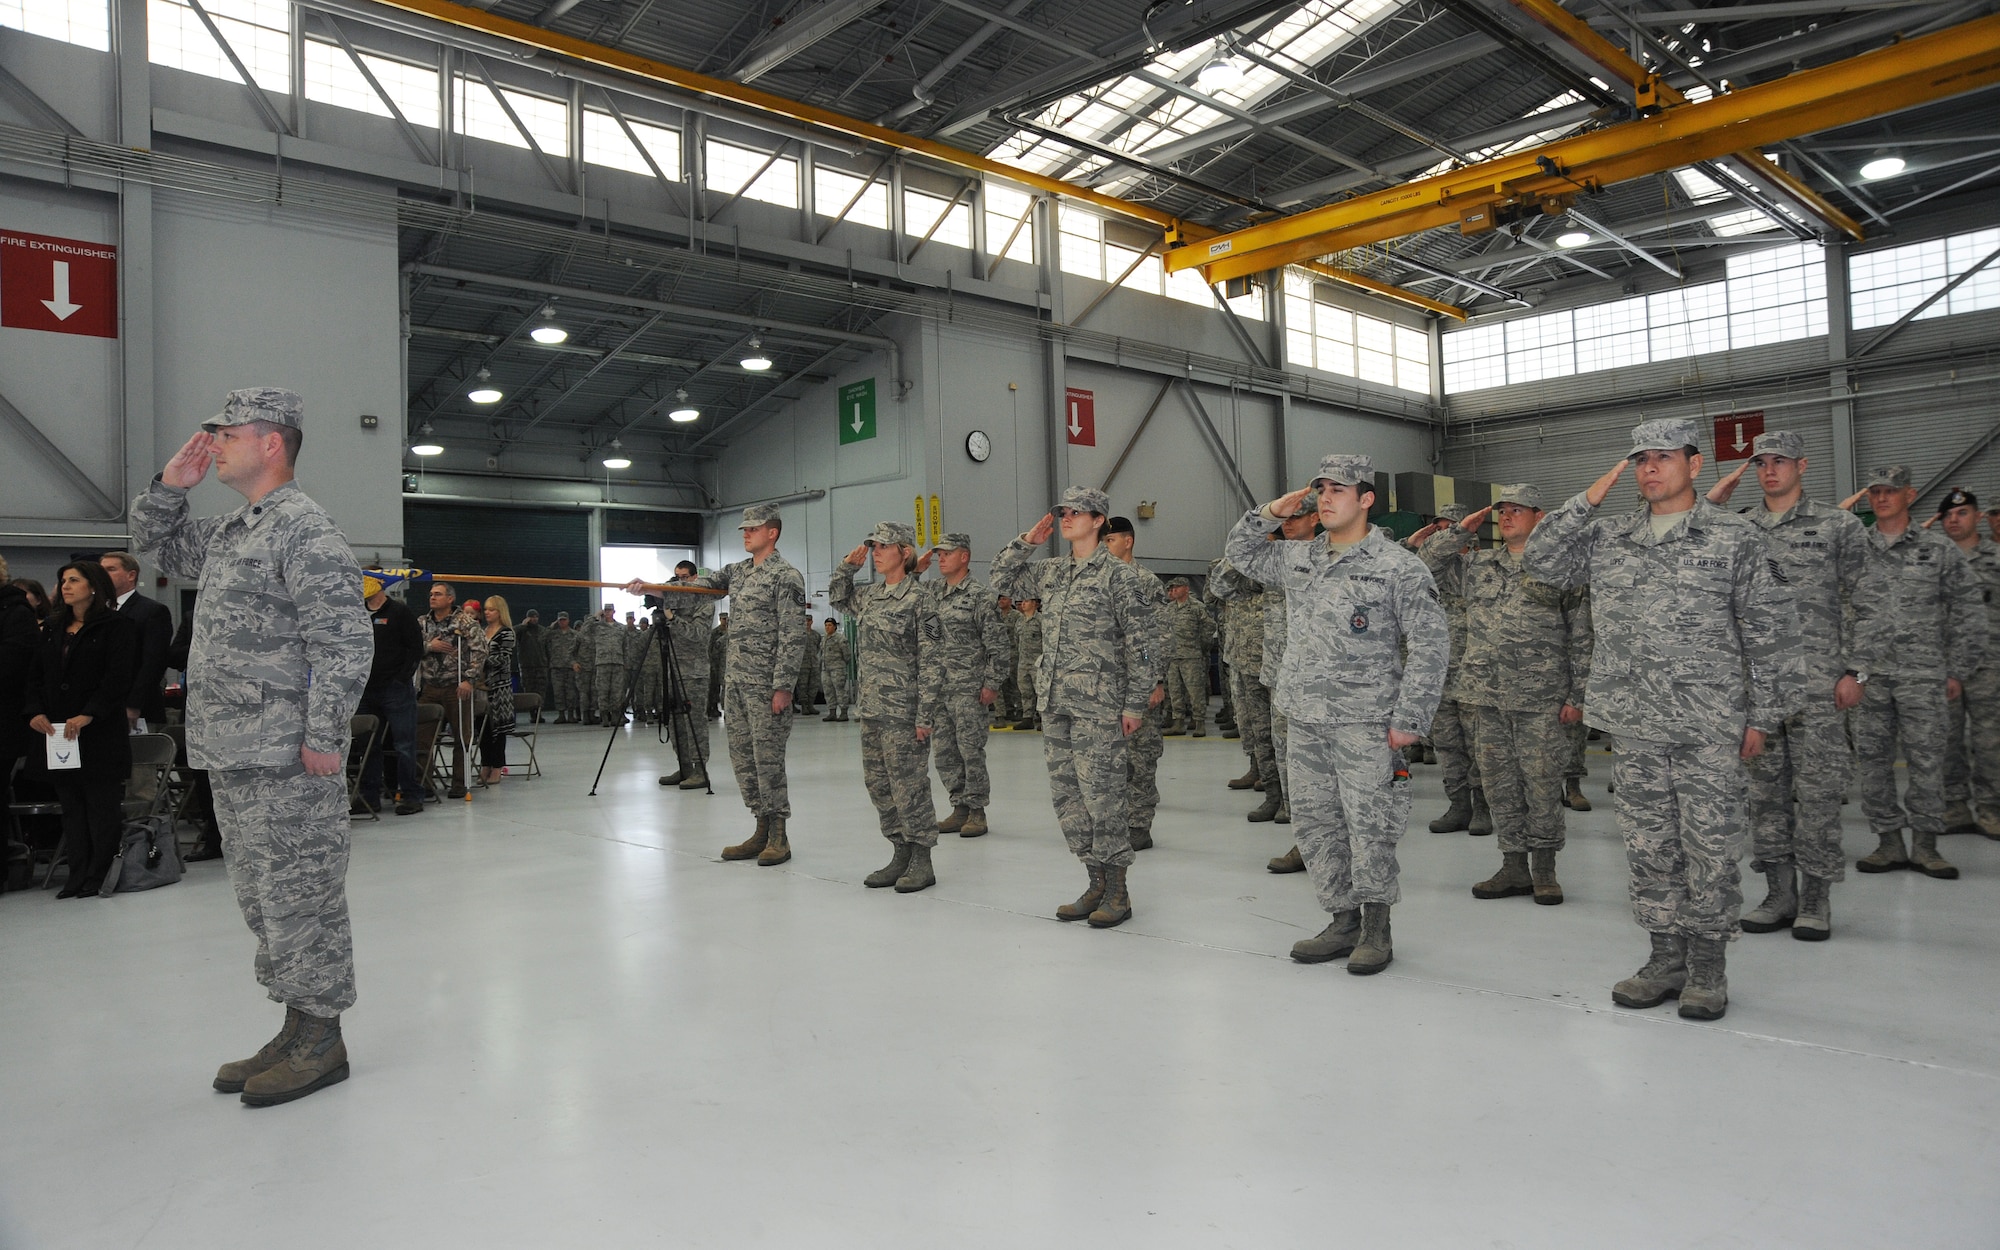 Airmen of the 142nd Fighter Wing Civil Engineer Squadron and Security Forces Squadron render a salute during their formal Demobilization Ceremony at the Portland Air National Guard Base, Ore., Dec. 7, 2014. The Airmen recently returned from overseas deployment assignments to support Operation Enduring Freedom. (U.S. Air National Guard photo by Tech. Sgt. John Hughel, 142nd Fighter Wing Public Affairs/Released)